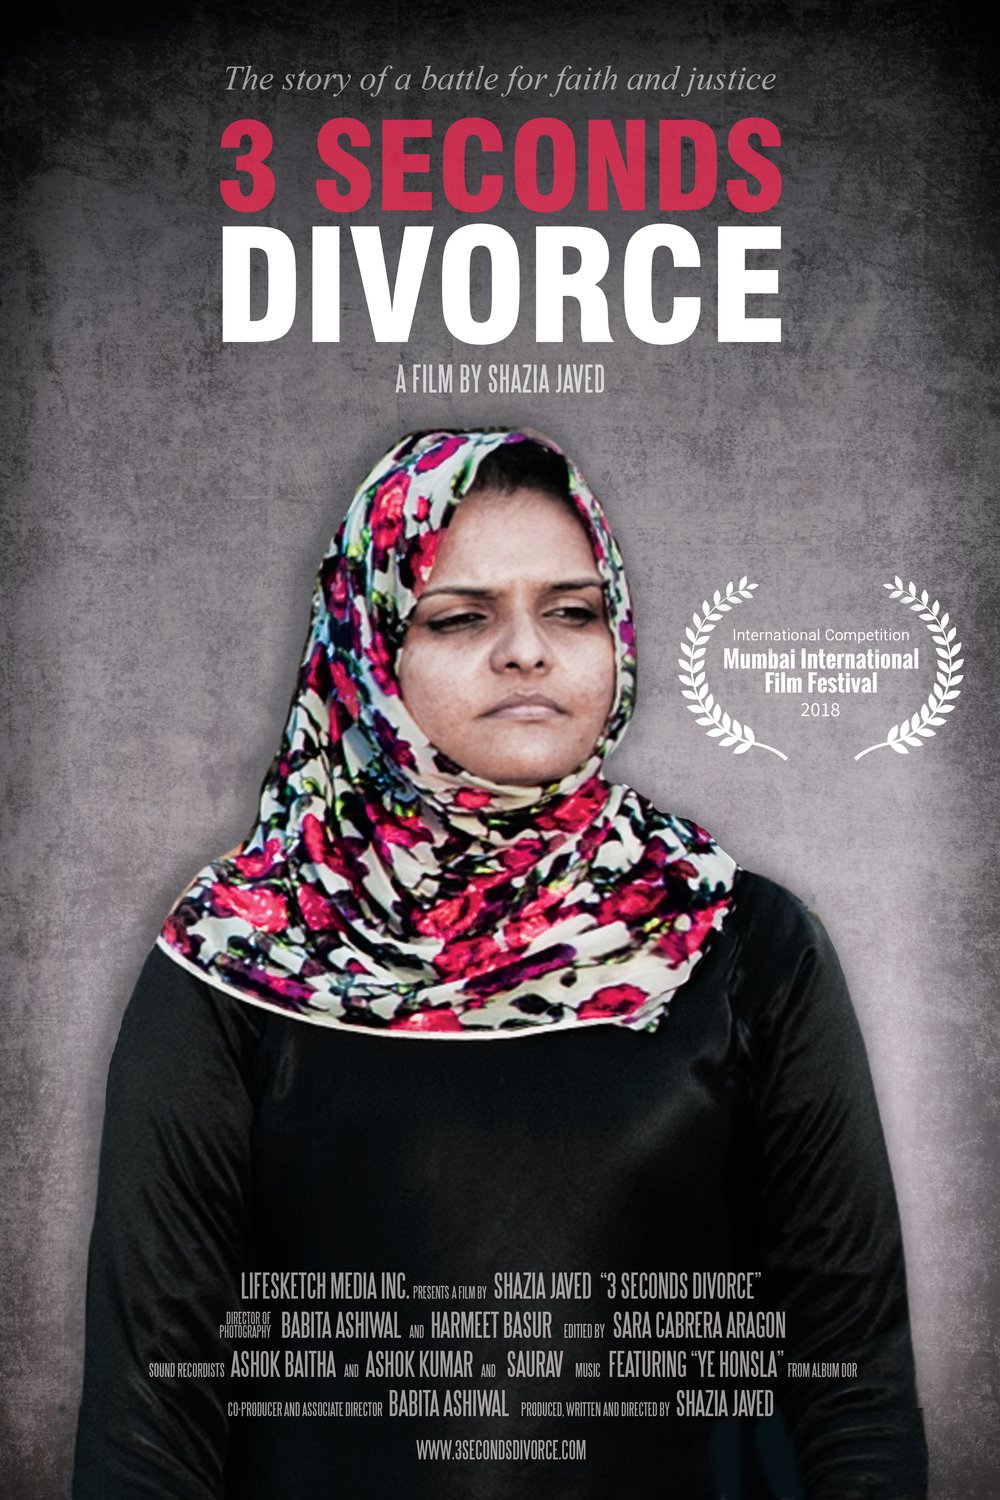 Hindi poster of the movie 3 Seconds Divorce